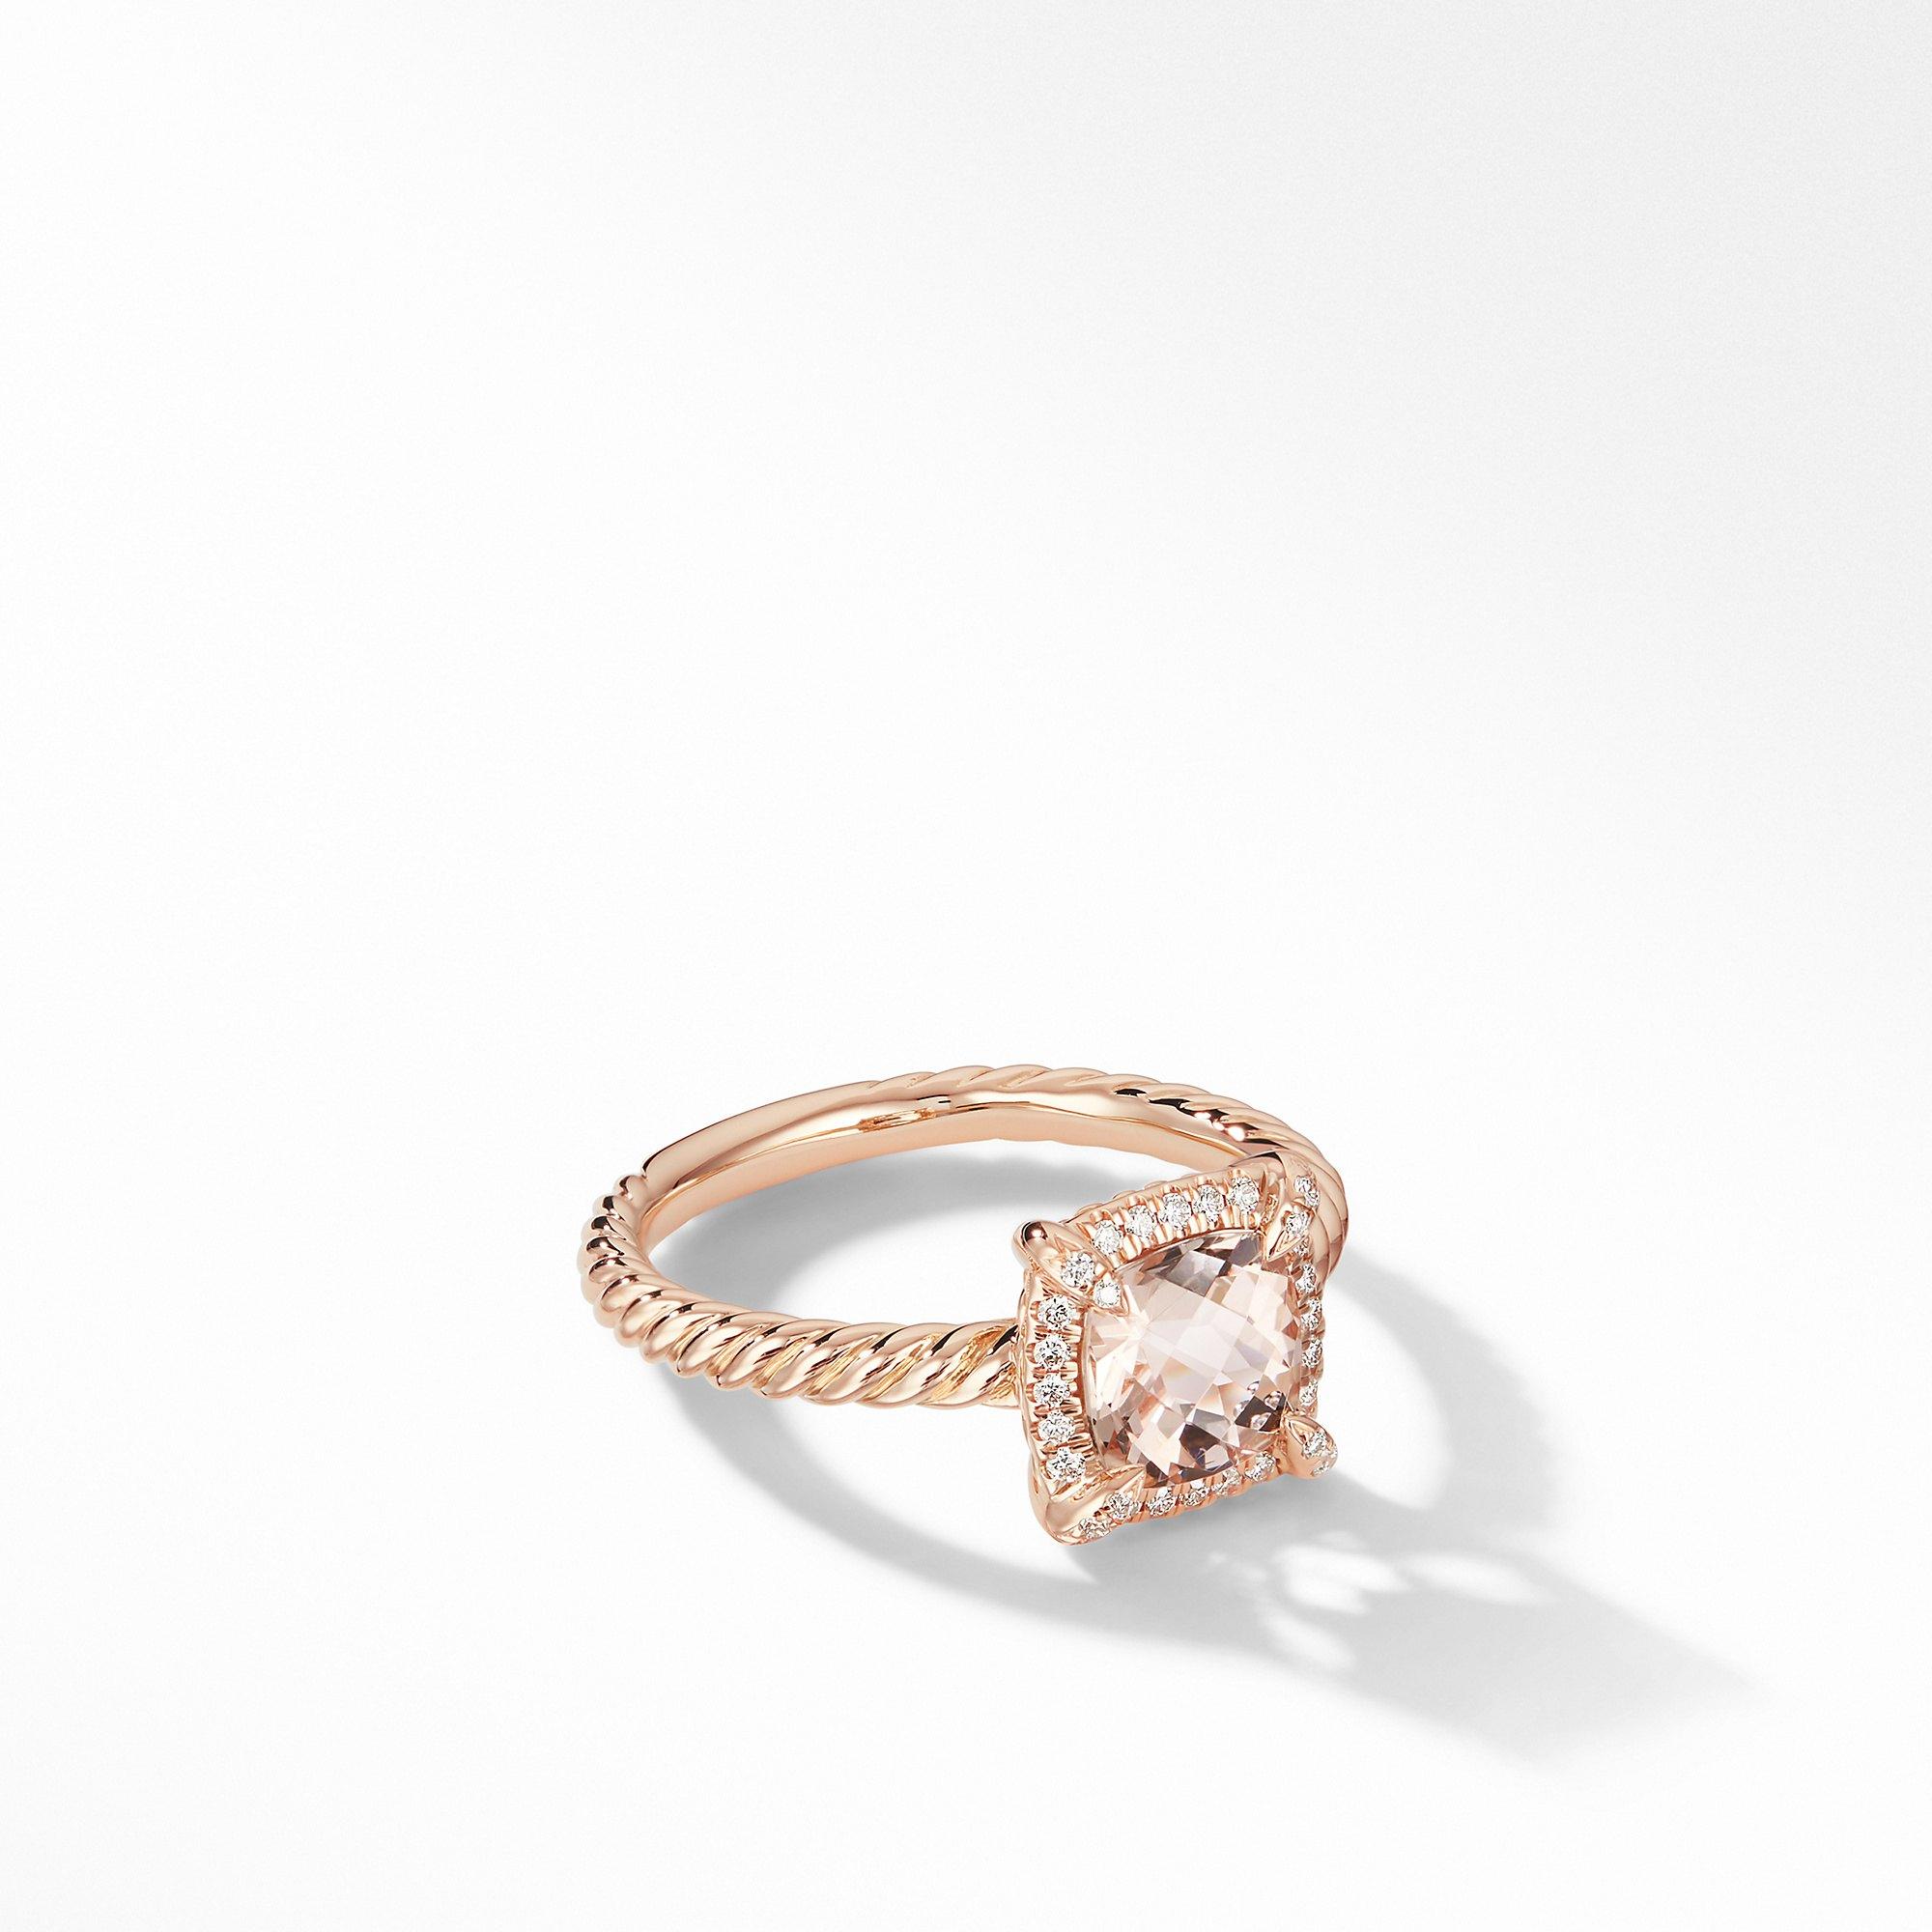 David Yurman Petite Chatelaine Pave Bezel Ring in 18k Rose Gold with Morganite, size 6.5